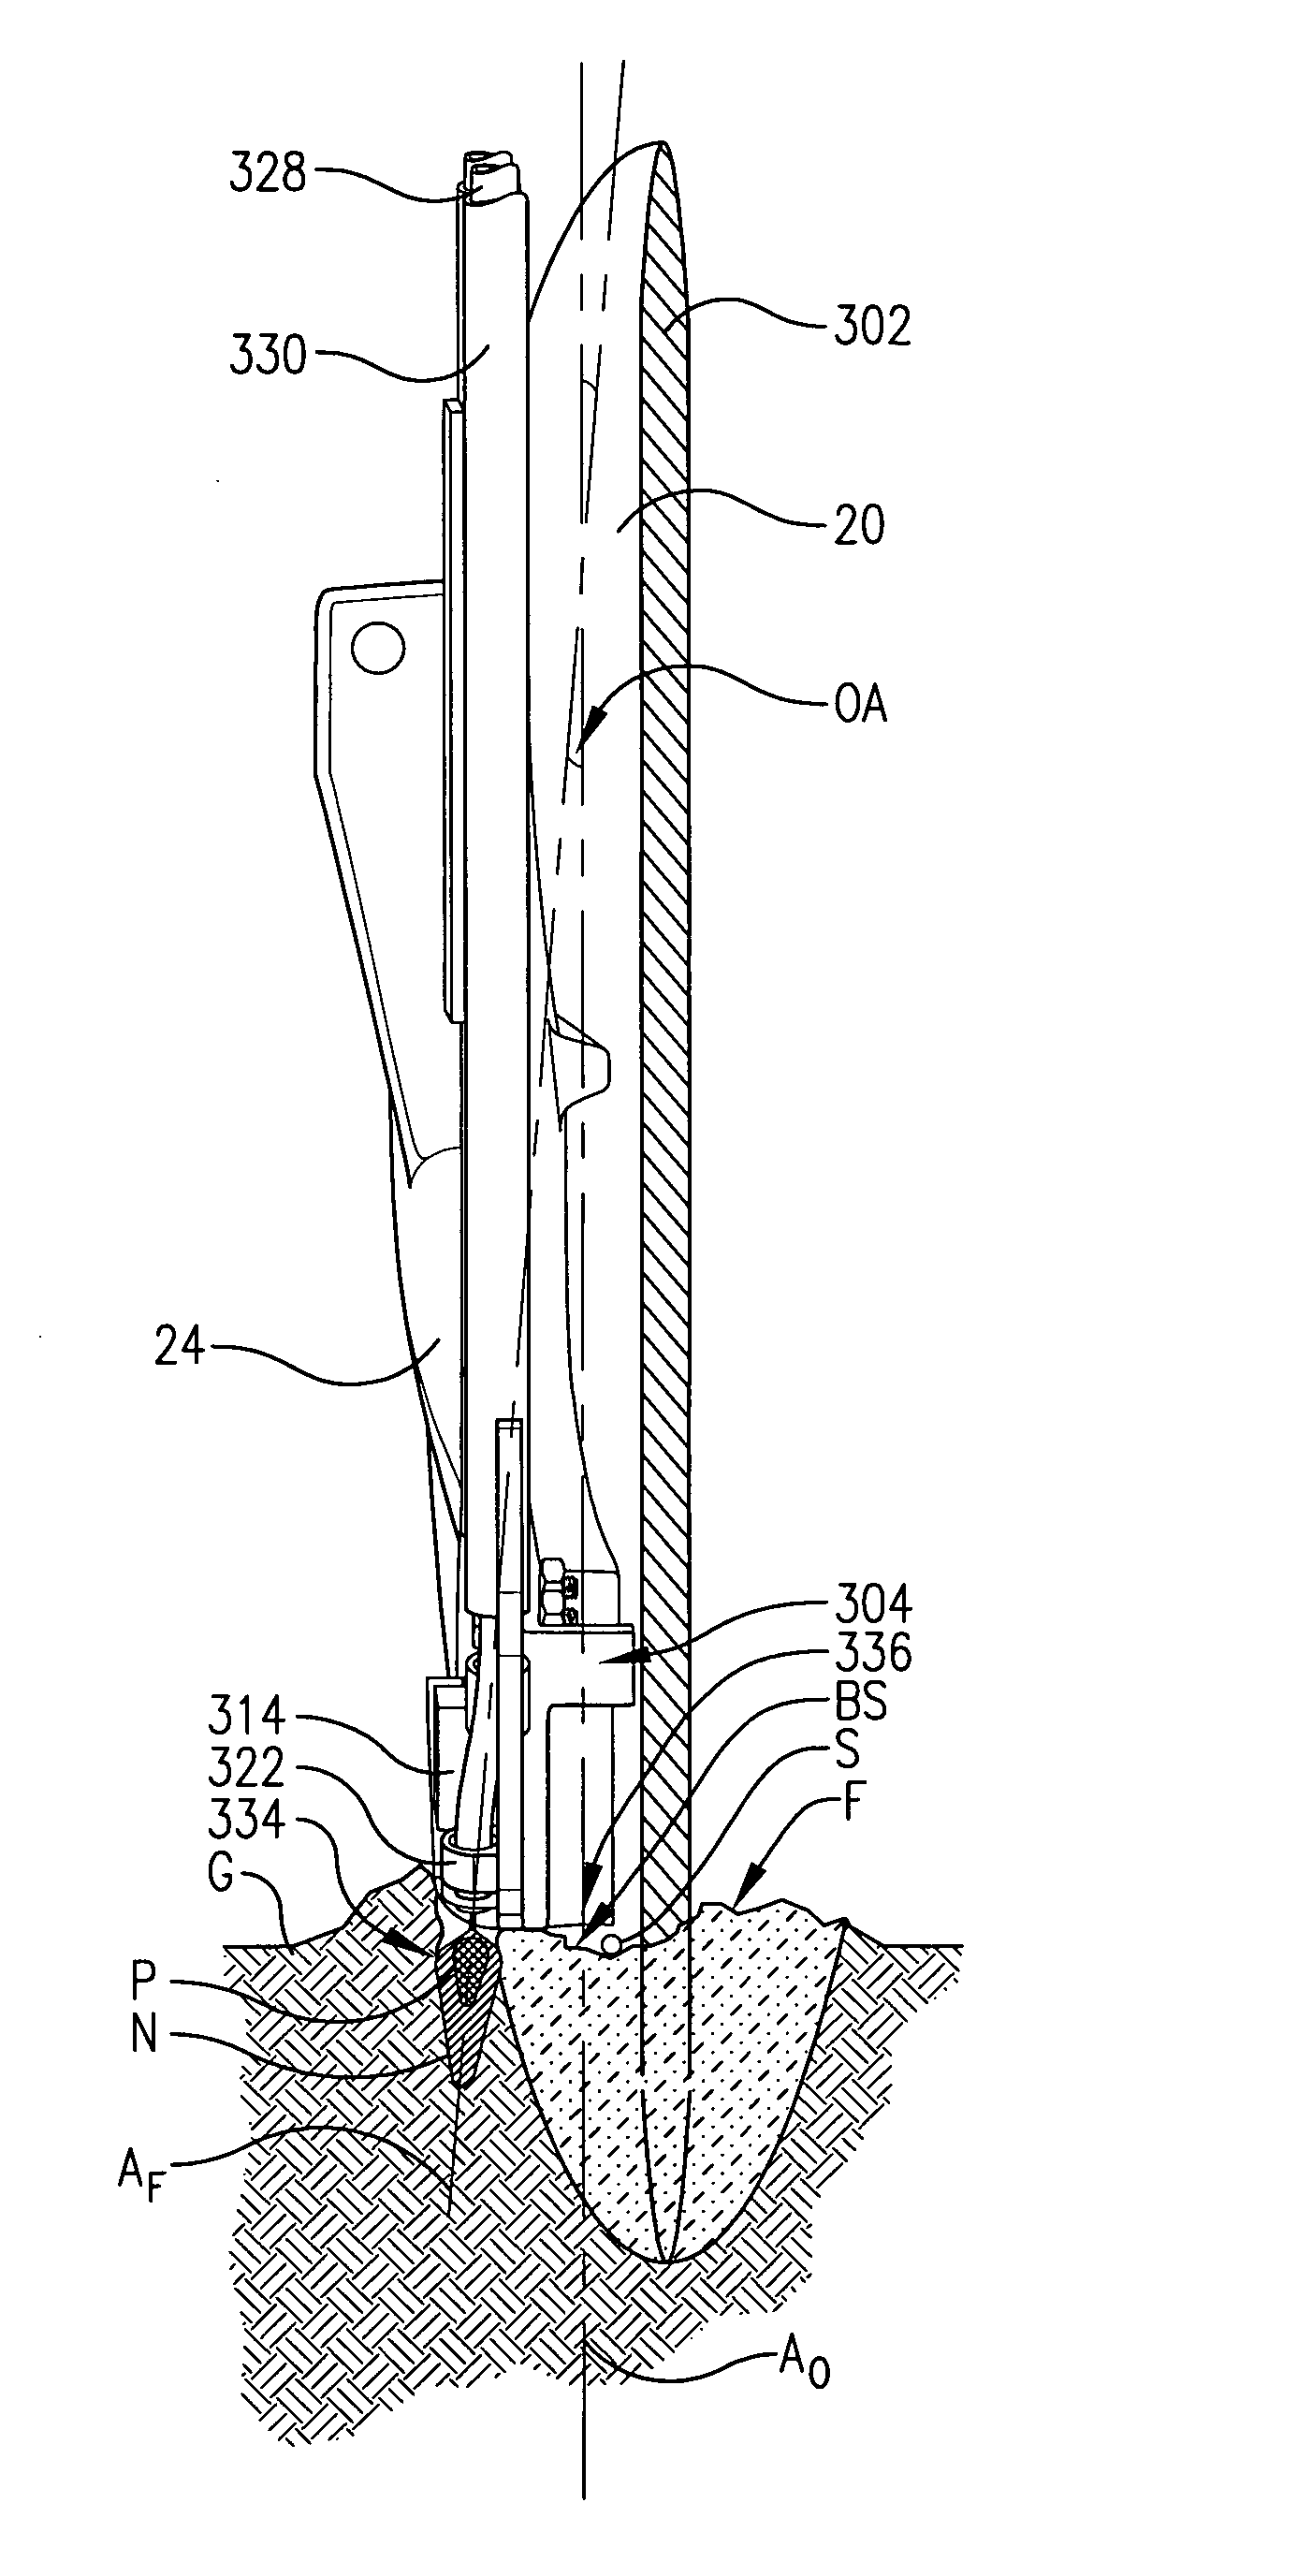 Fertilizer injector wing for disc openers